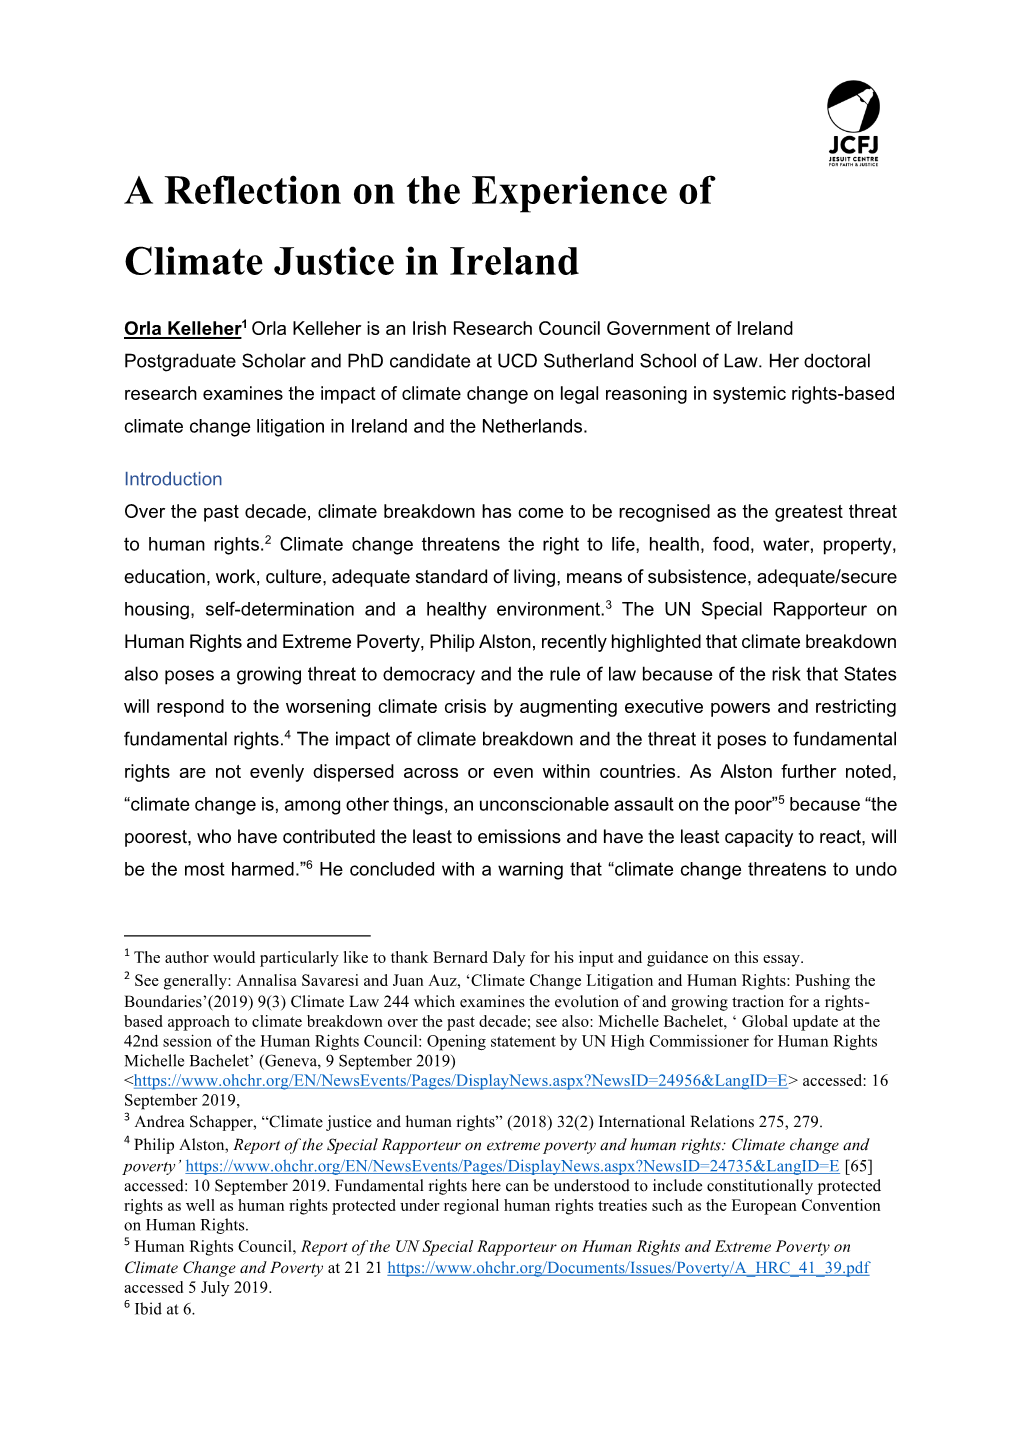 A Reflection on the Experience of Climate Justice in Ireland